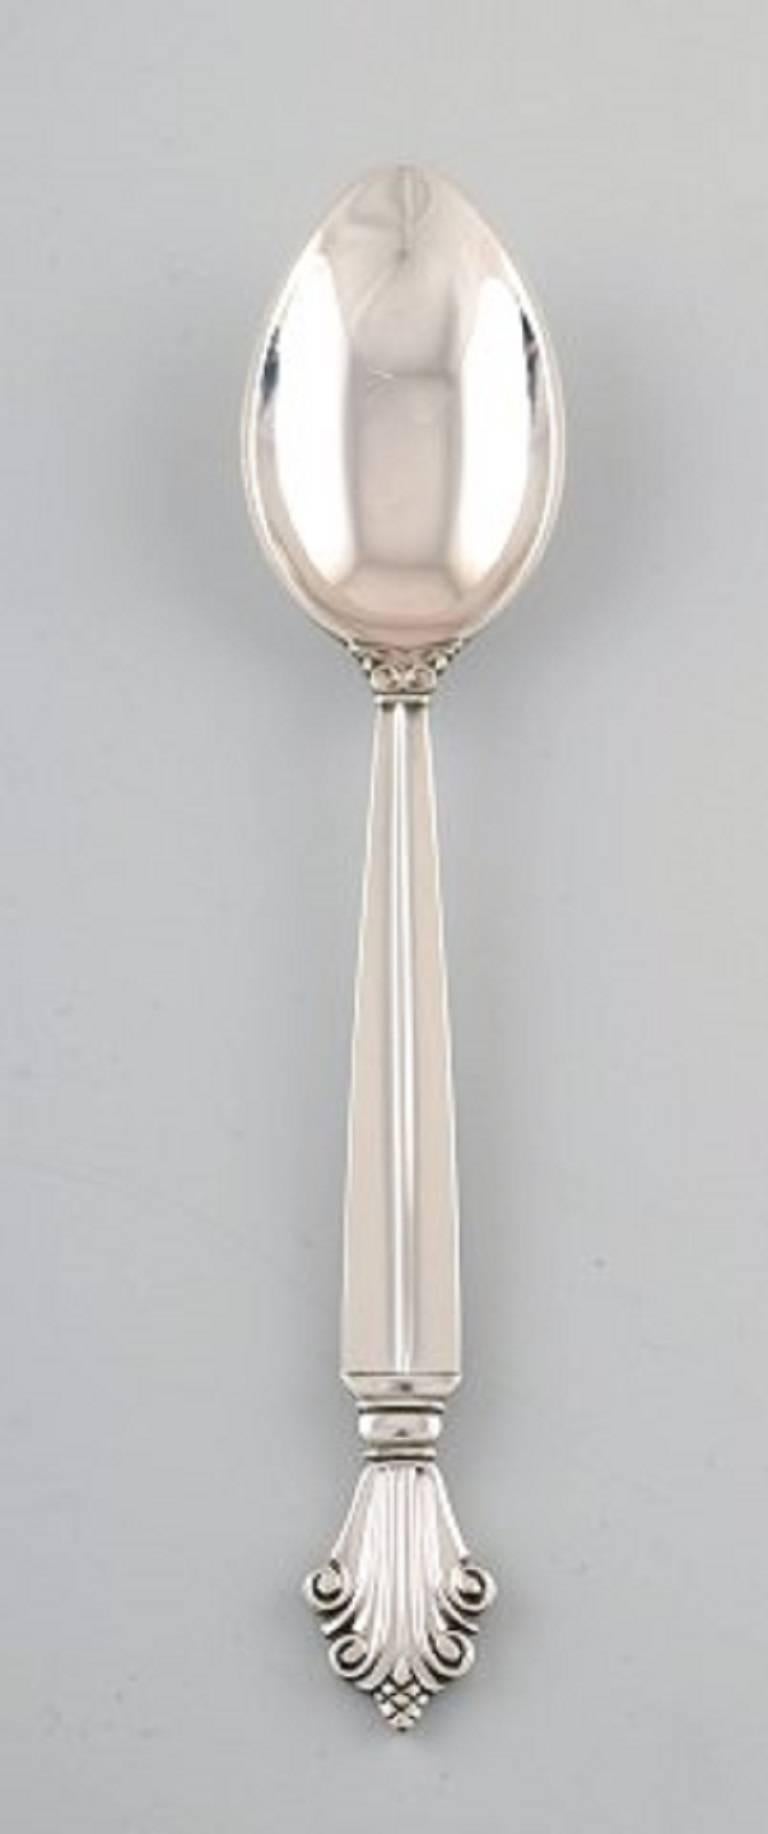 12 Georg Jensen acanthus sterling silver, tea spoons.
Measures: 14.5 cm.
Marked
In very good condition.